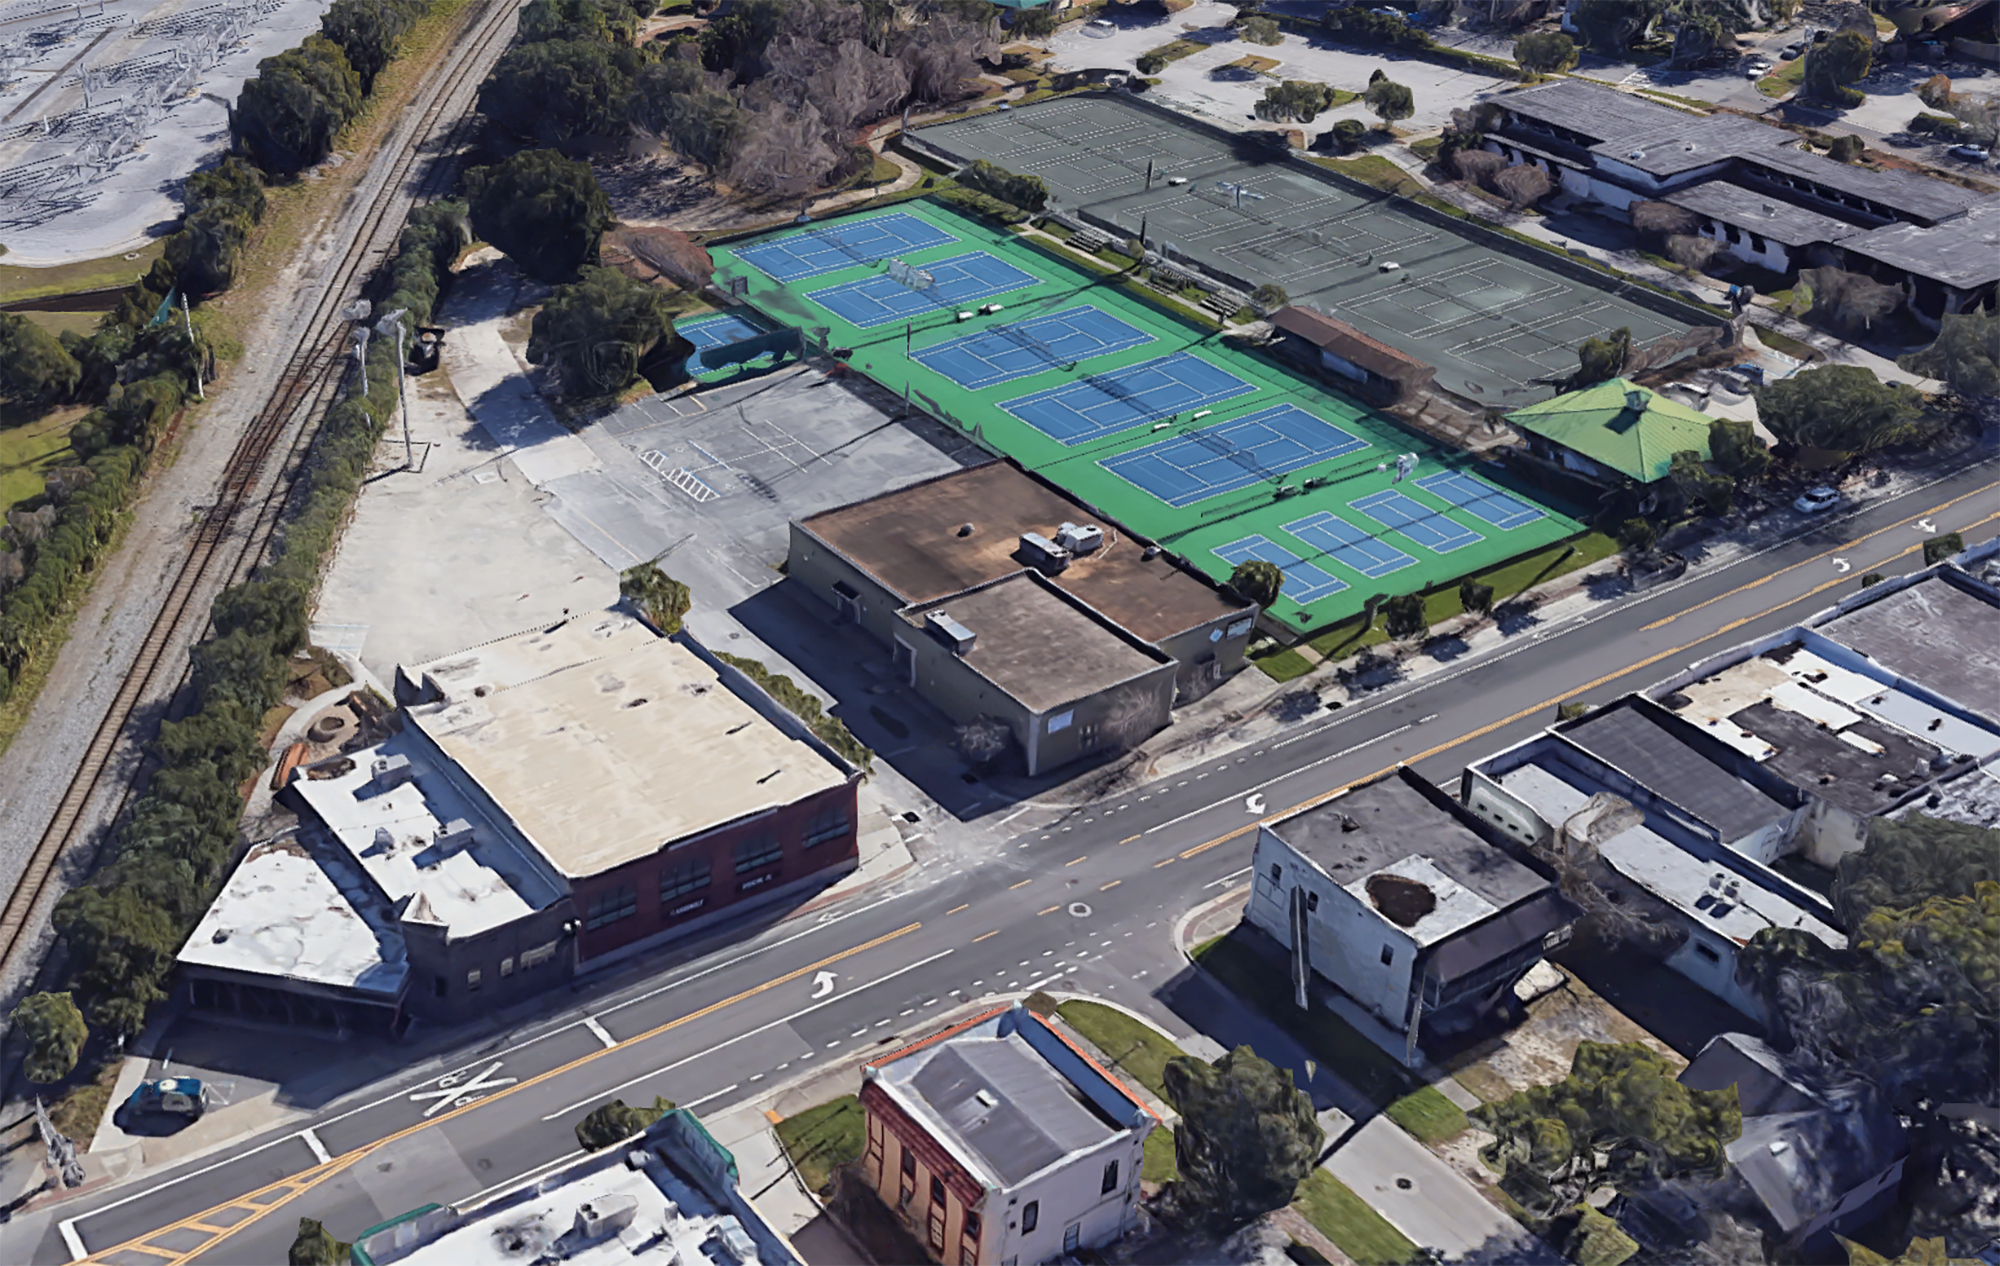 The building is adjacent to the Southside Park tennis center. (Google)